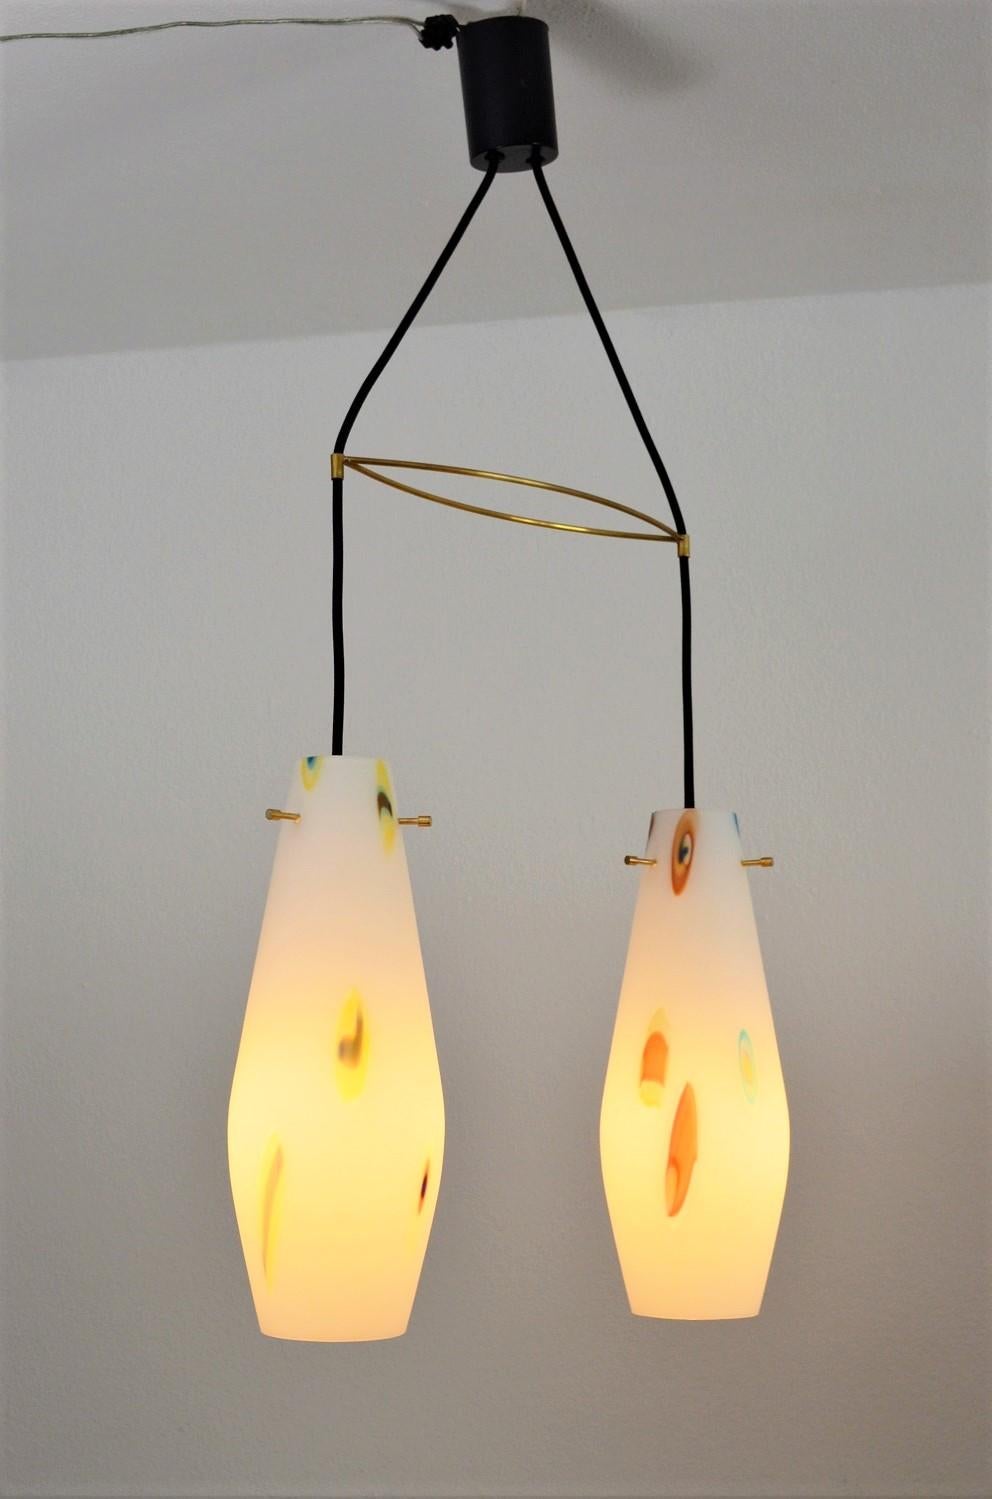 Gorgeous pendant light with two glasses.
Made in Italy by Stilnovo in the 1970s.
Inside the milky glasses are melt 